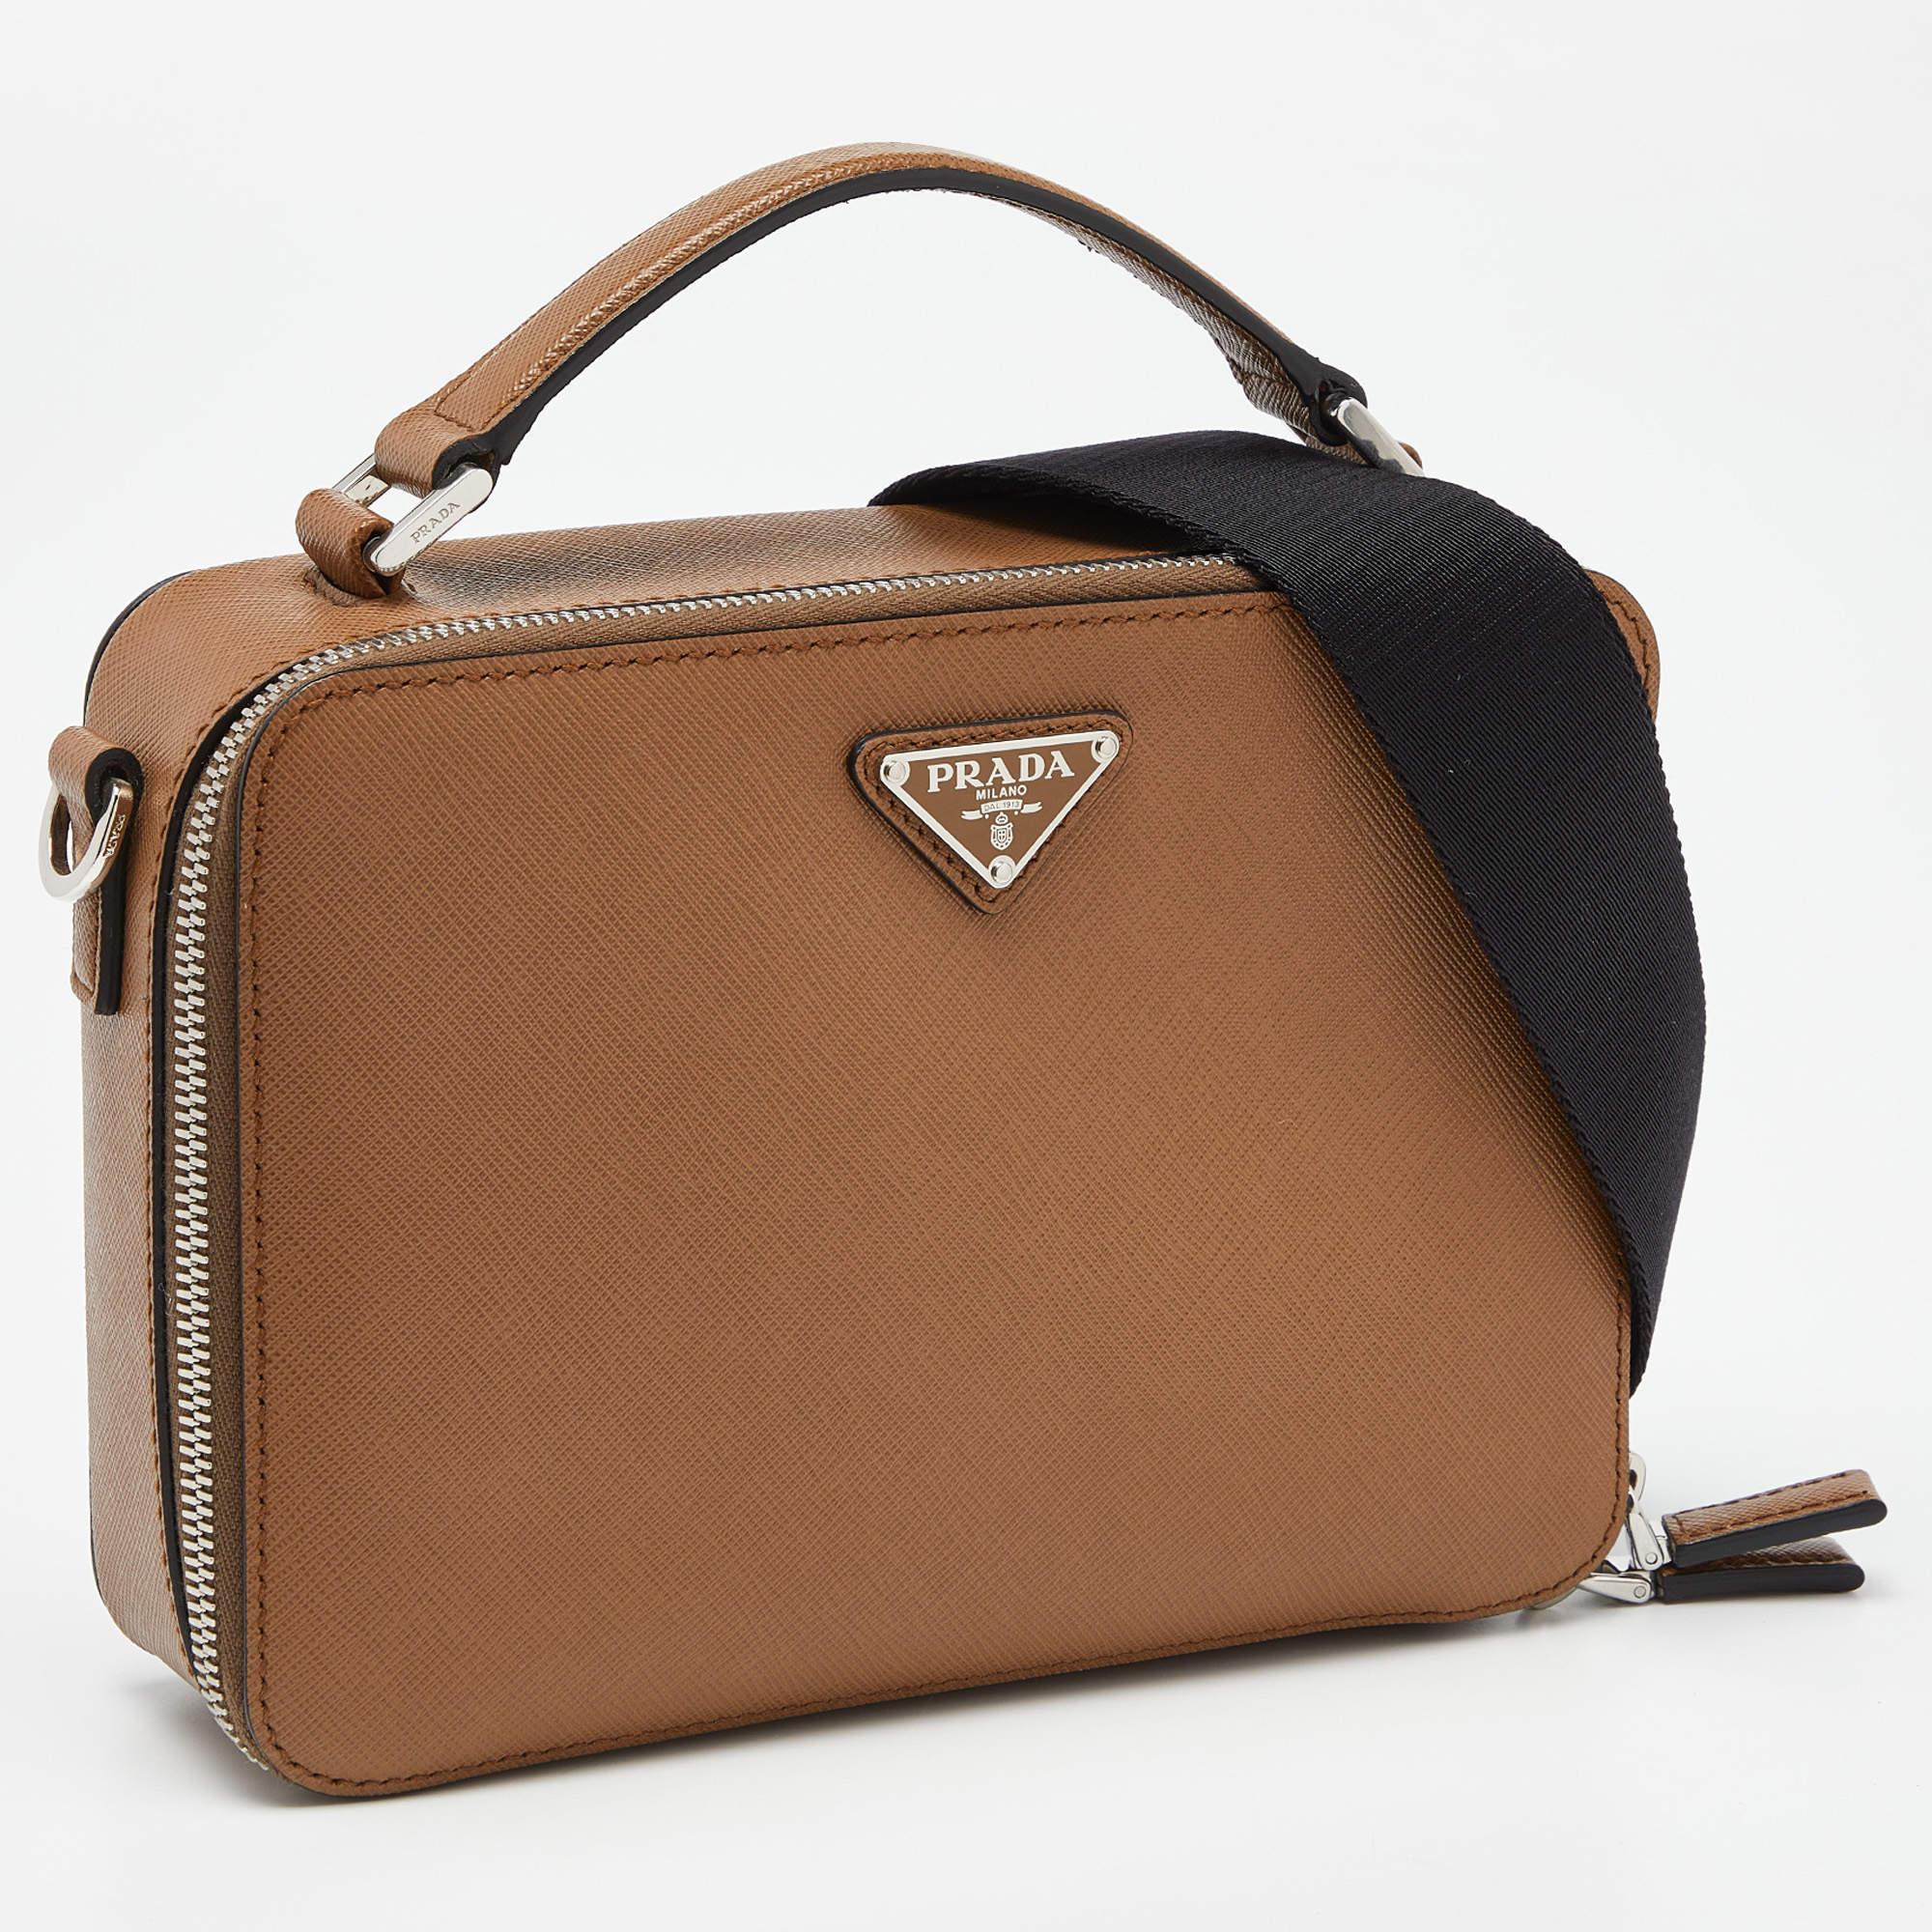 Trust Prada messenger bags to offer functional ease and a comfortable carrying experience. Smartly designed, the bag has an appealing exterior and a spacious interior. Perfect for work and weekend getaways.

